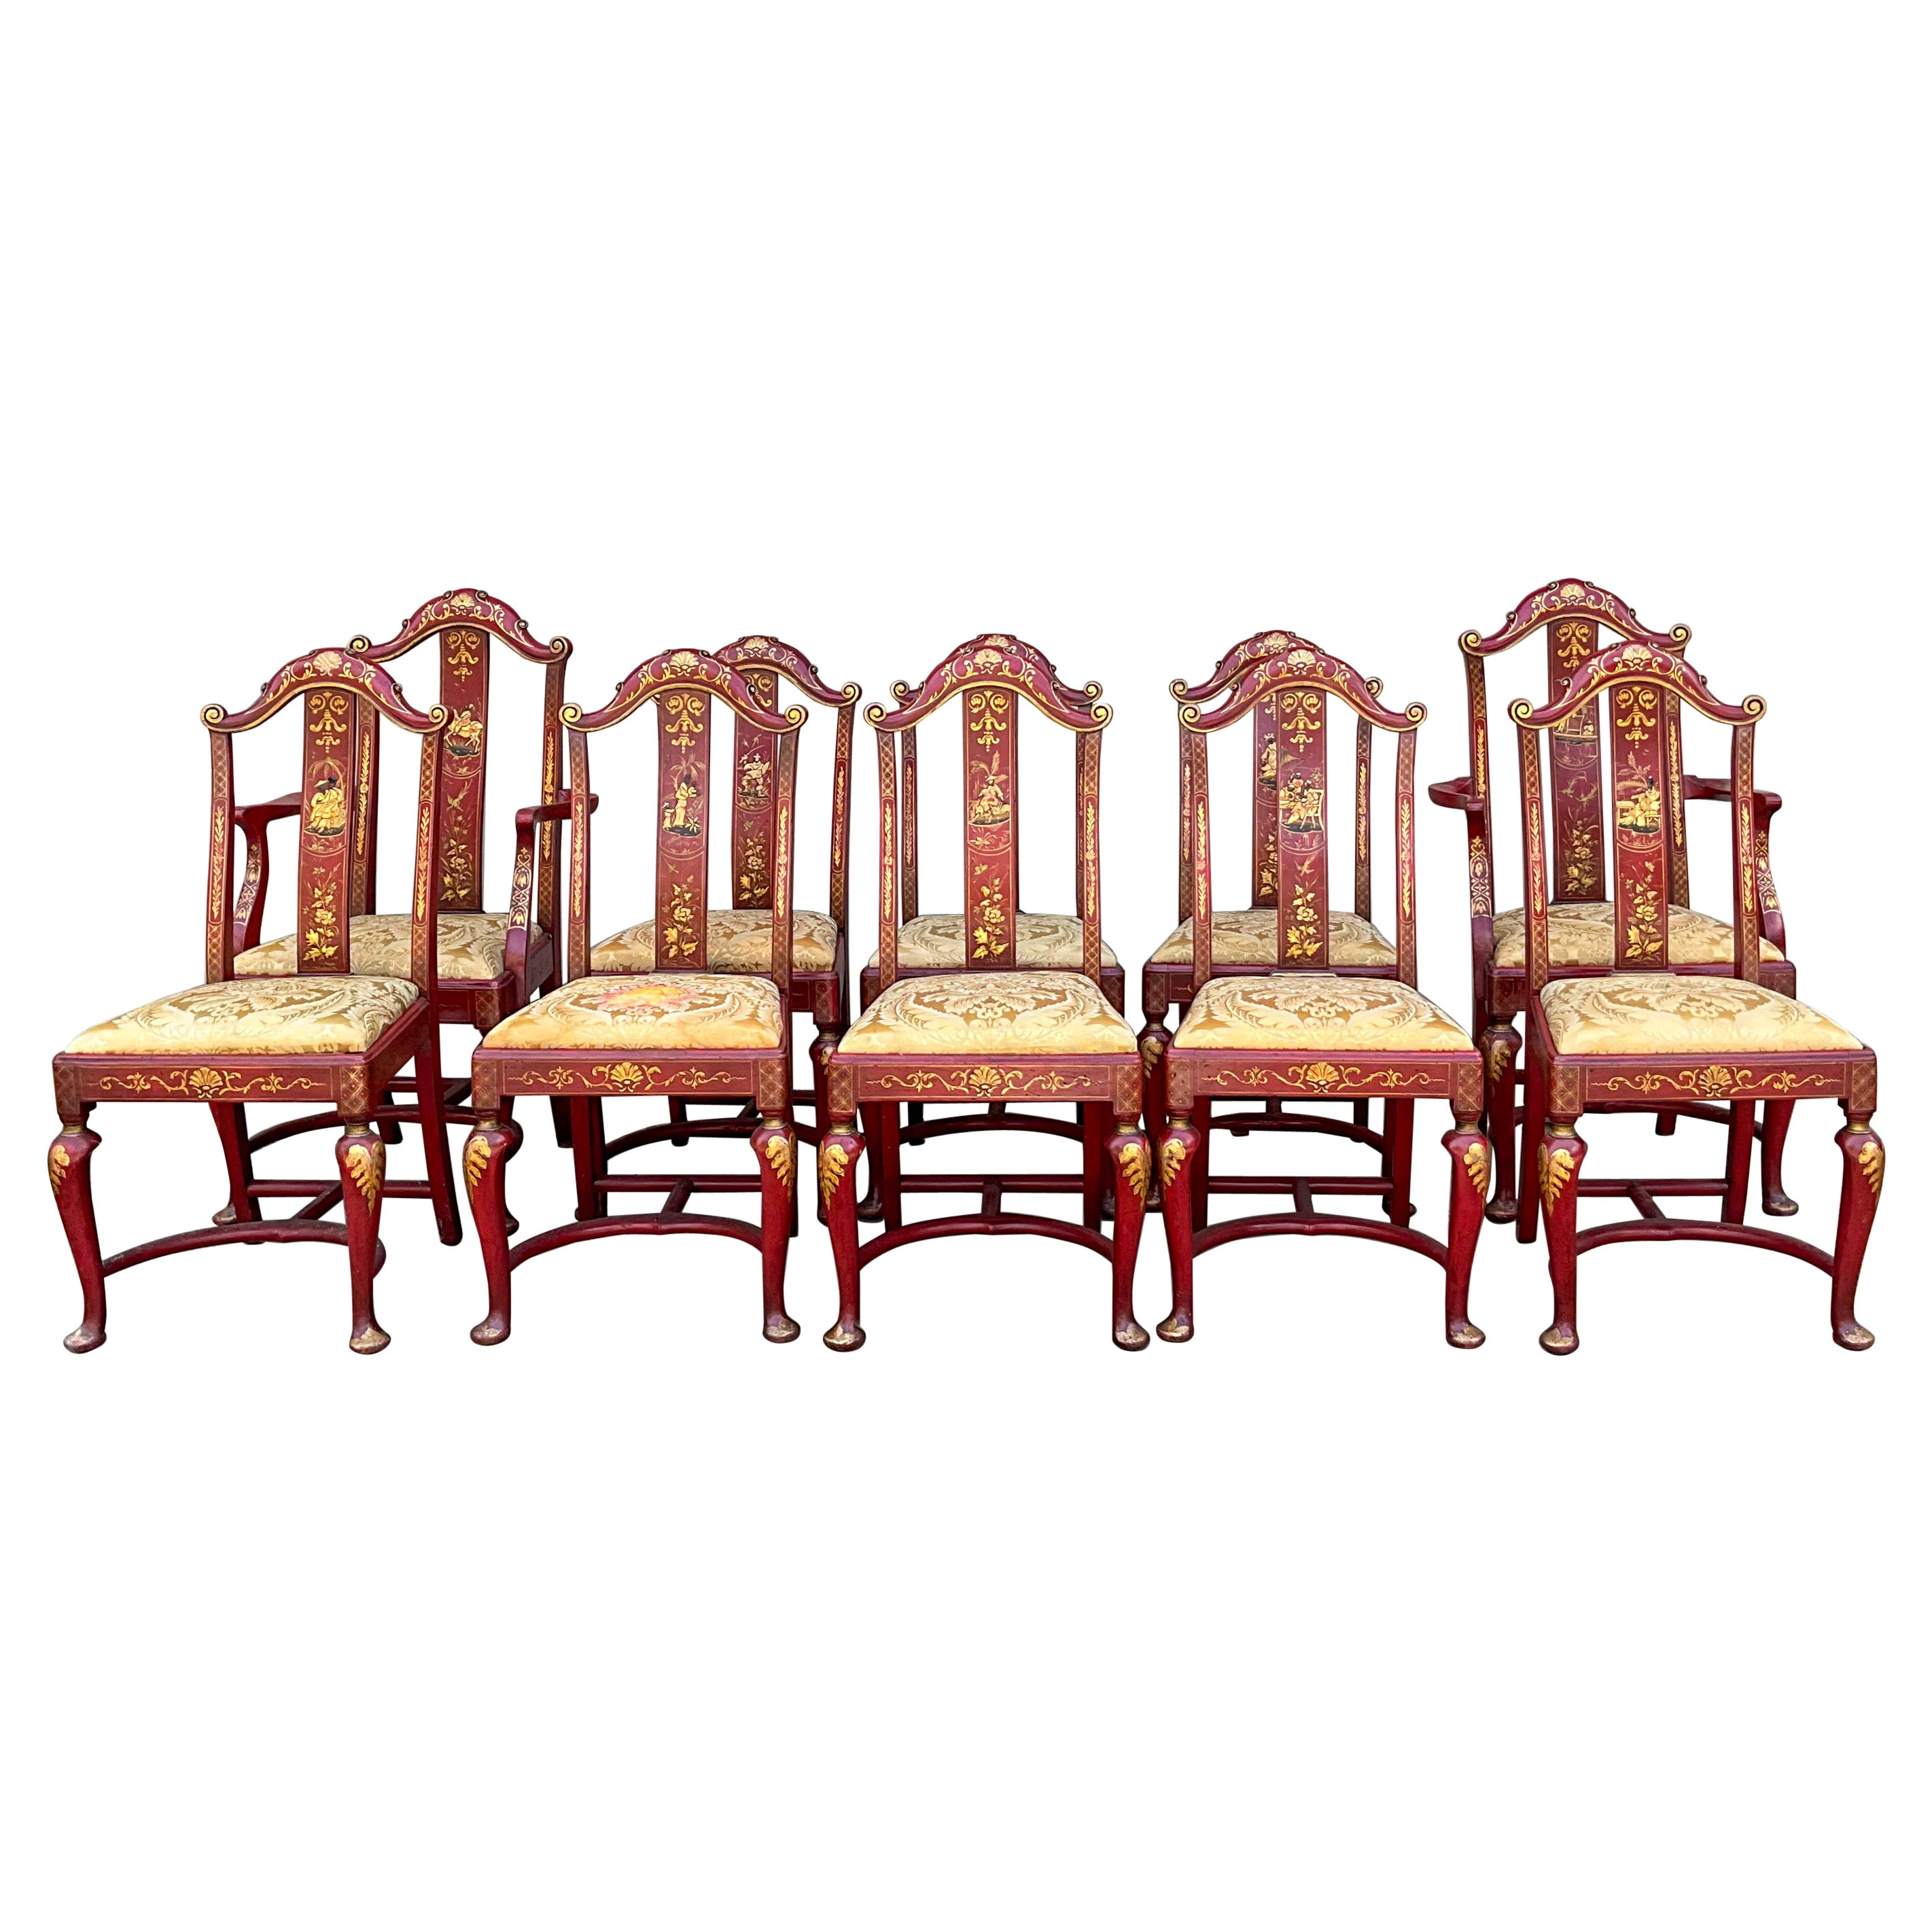 Early English Queen Anne Style Red & Gilt Chinoiserie Dining Chairs -S/10 For Sale